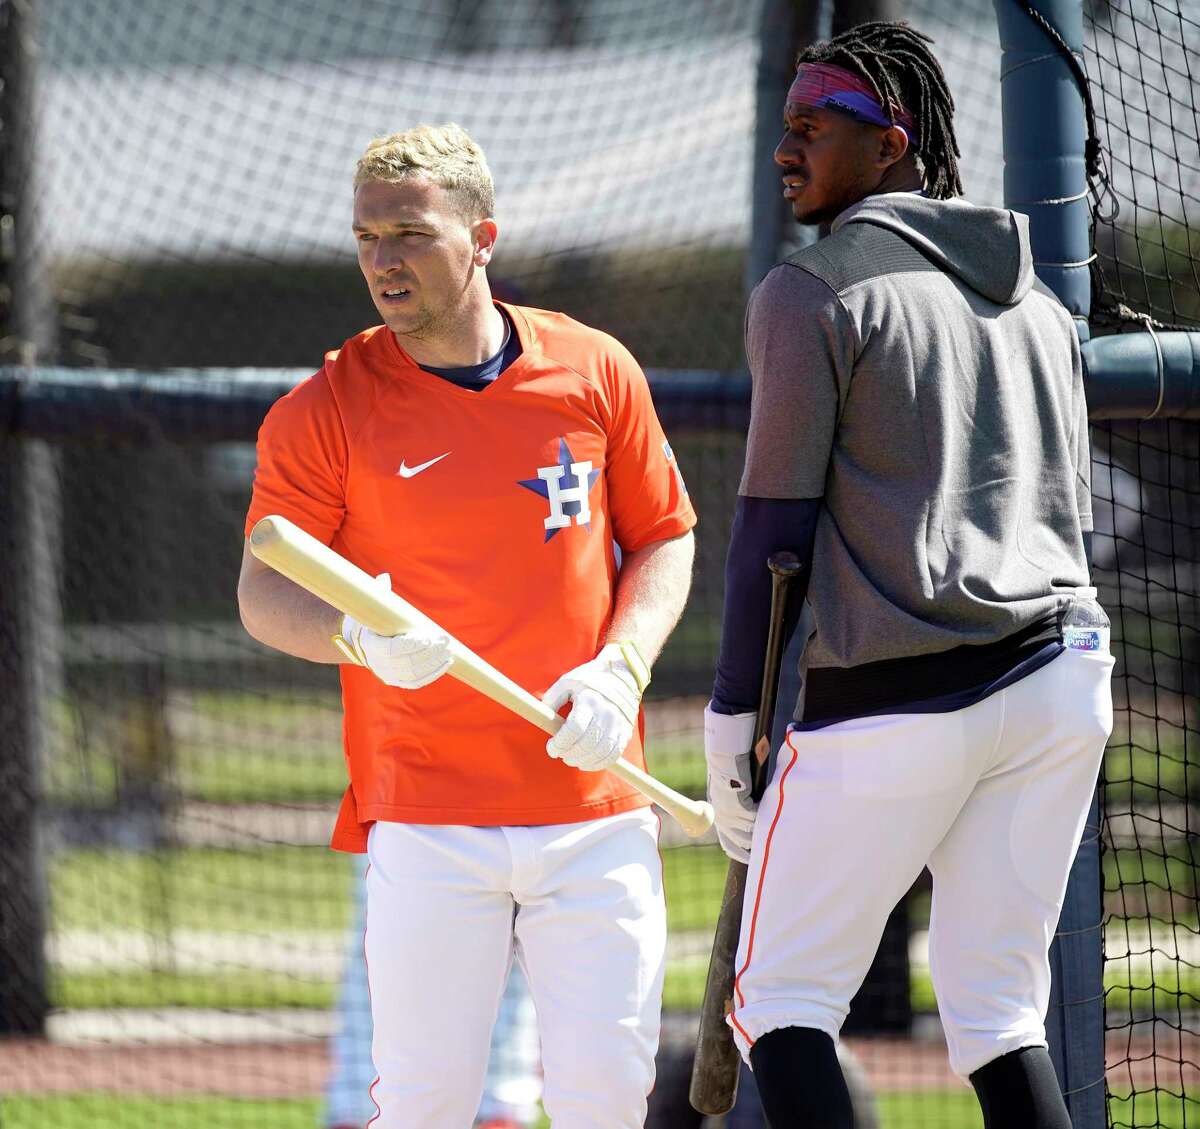 Houston Astros Alex Bregman and Lewis Brinson as Houston Astros players reported to spring training camp after the MLB lockout ended last week at The Ballpark of the Palm Beaches on Sunday, March 13, 2022 in West Palm Beach .